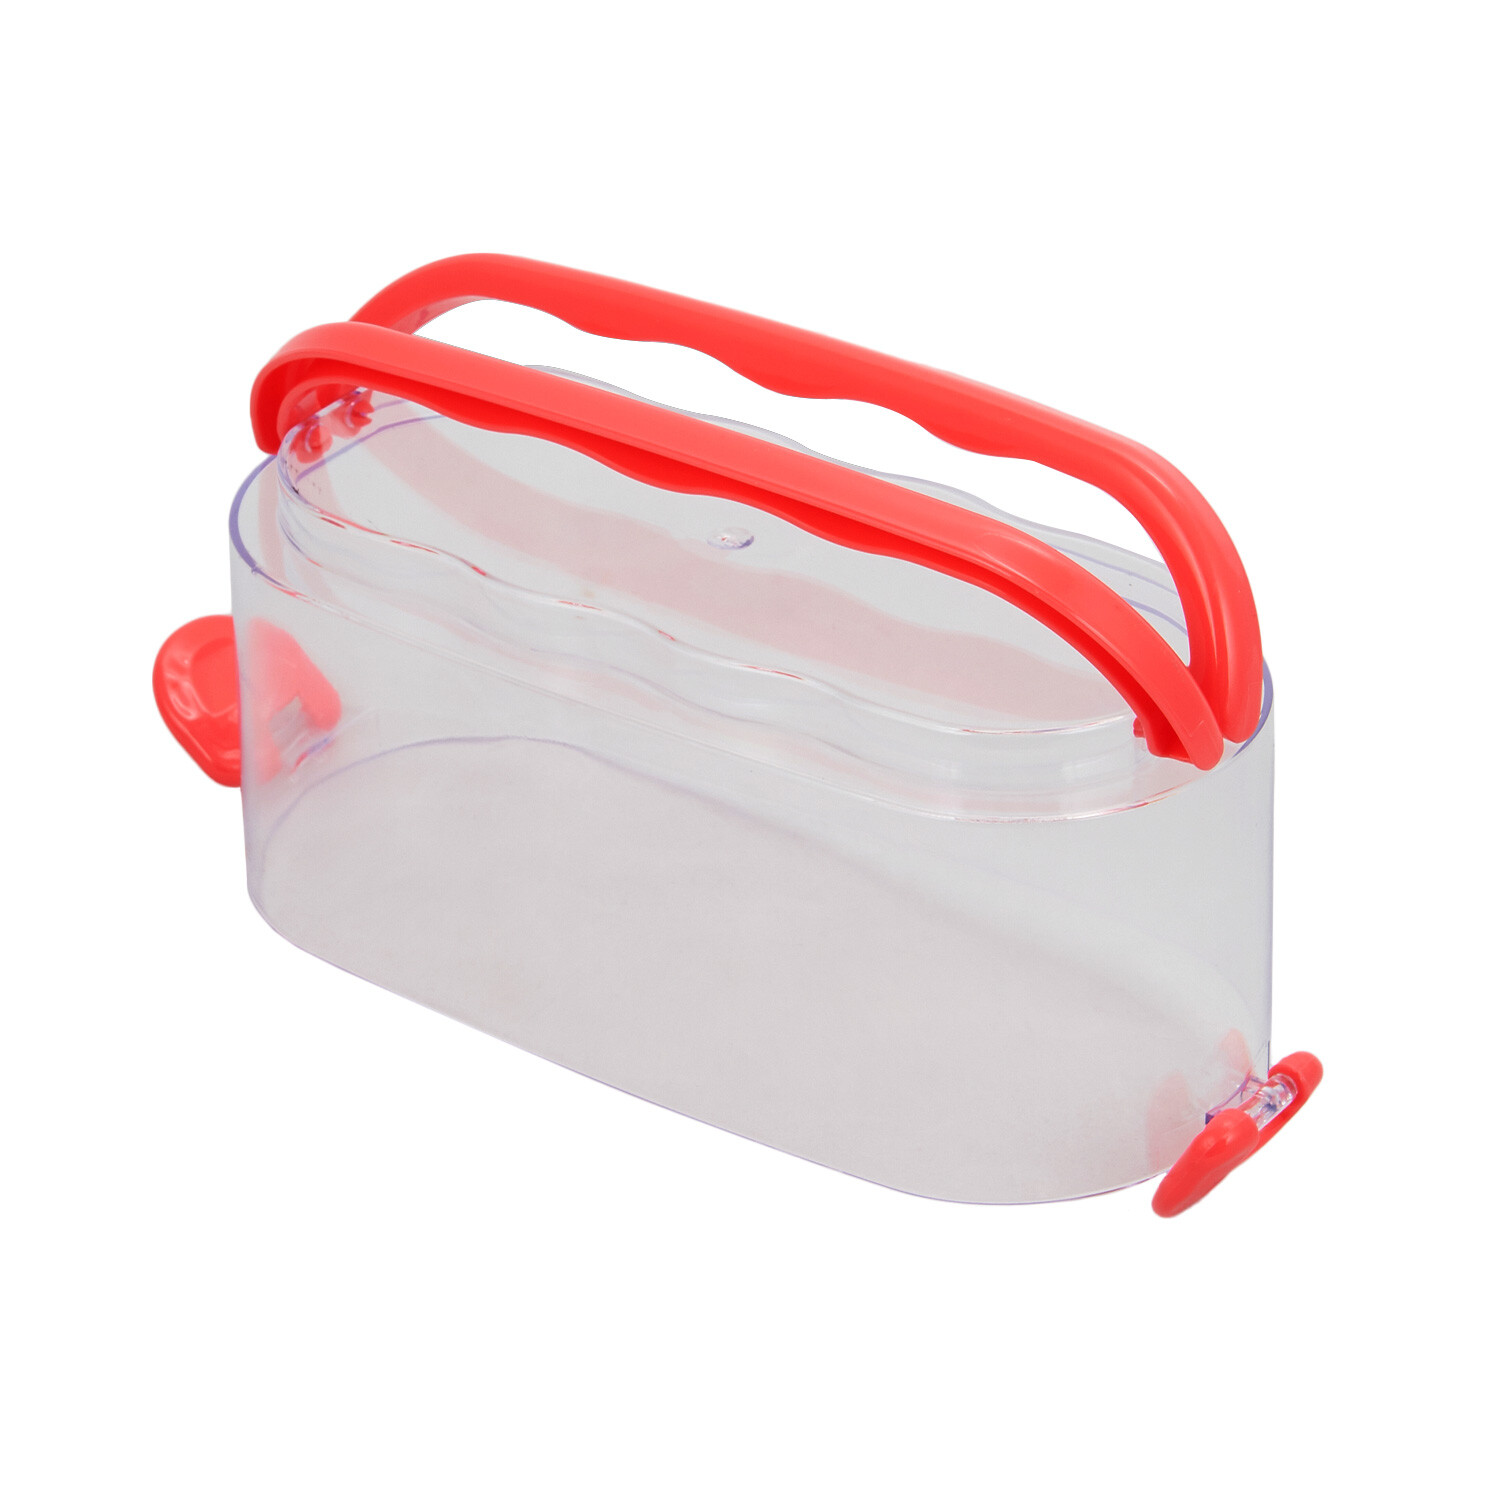 Triple Compartment Lunch Box - Red Image 6